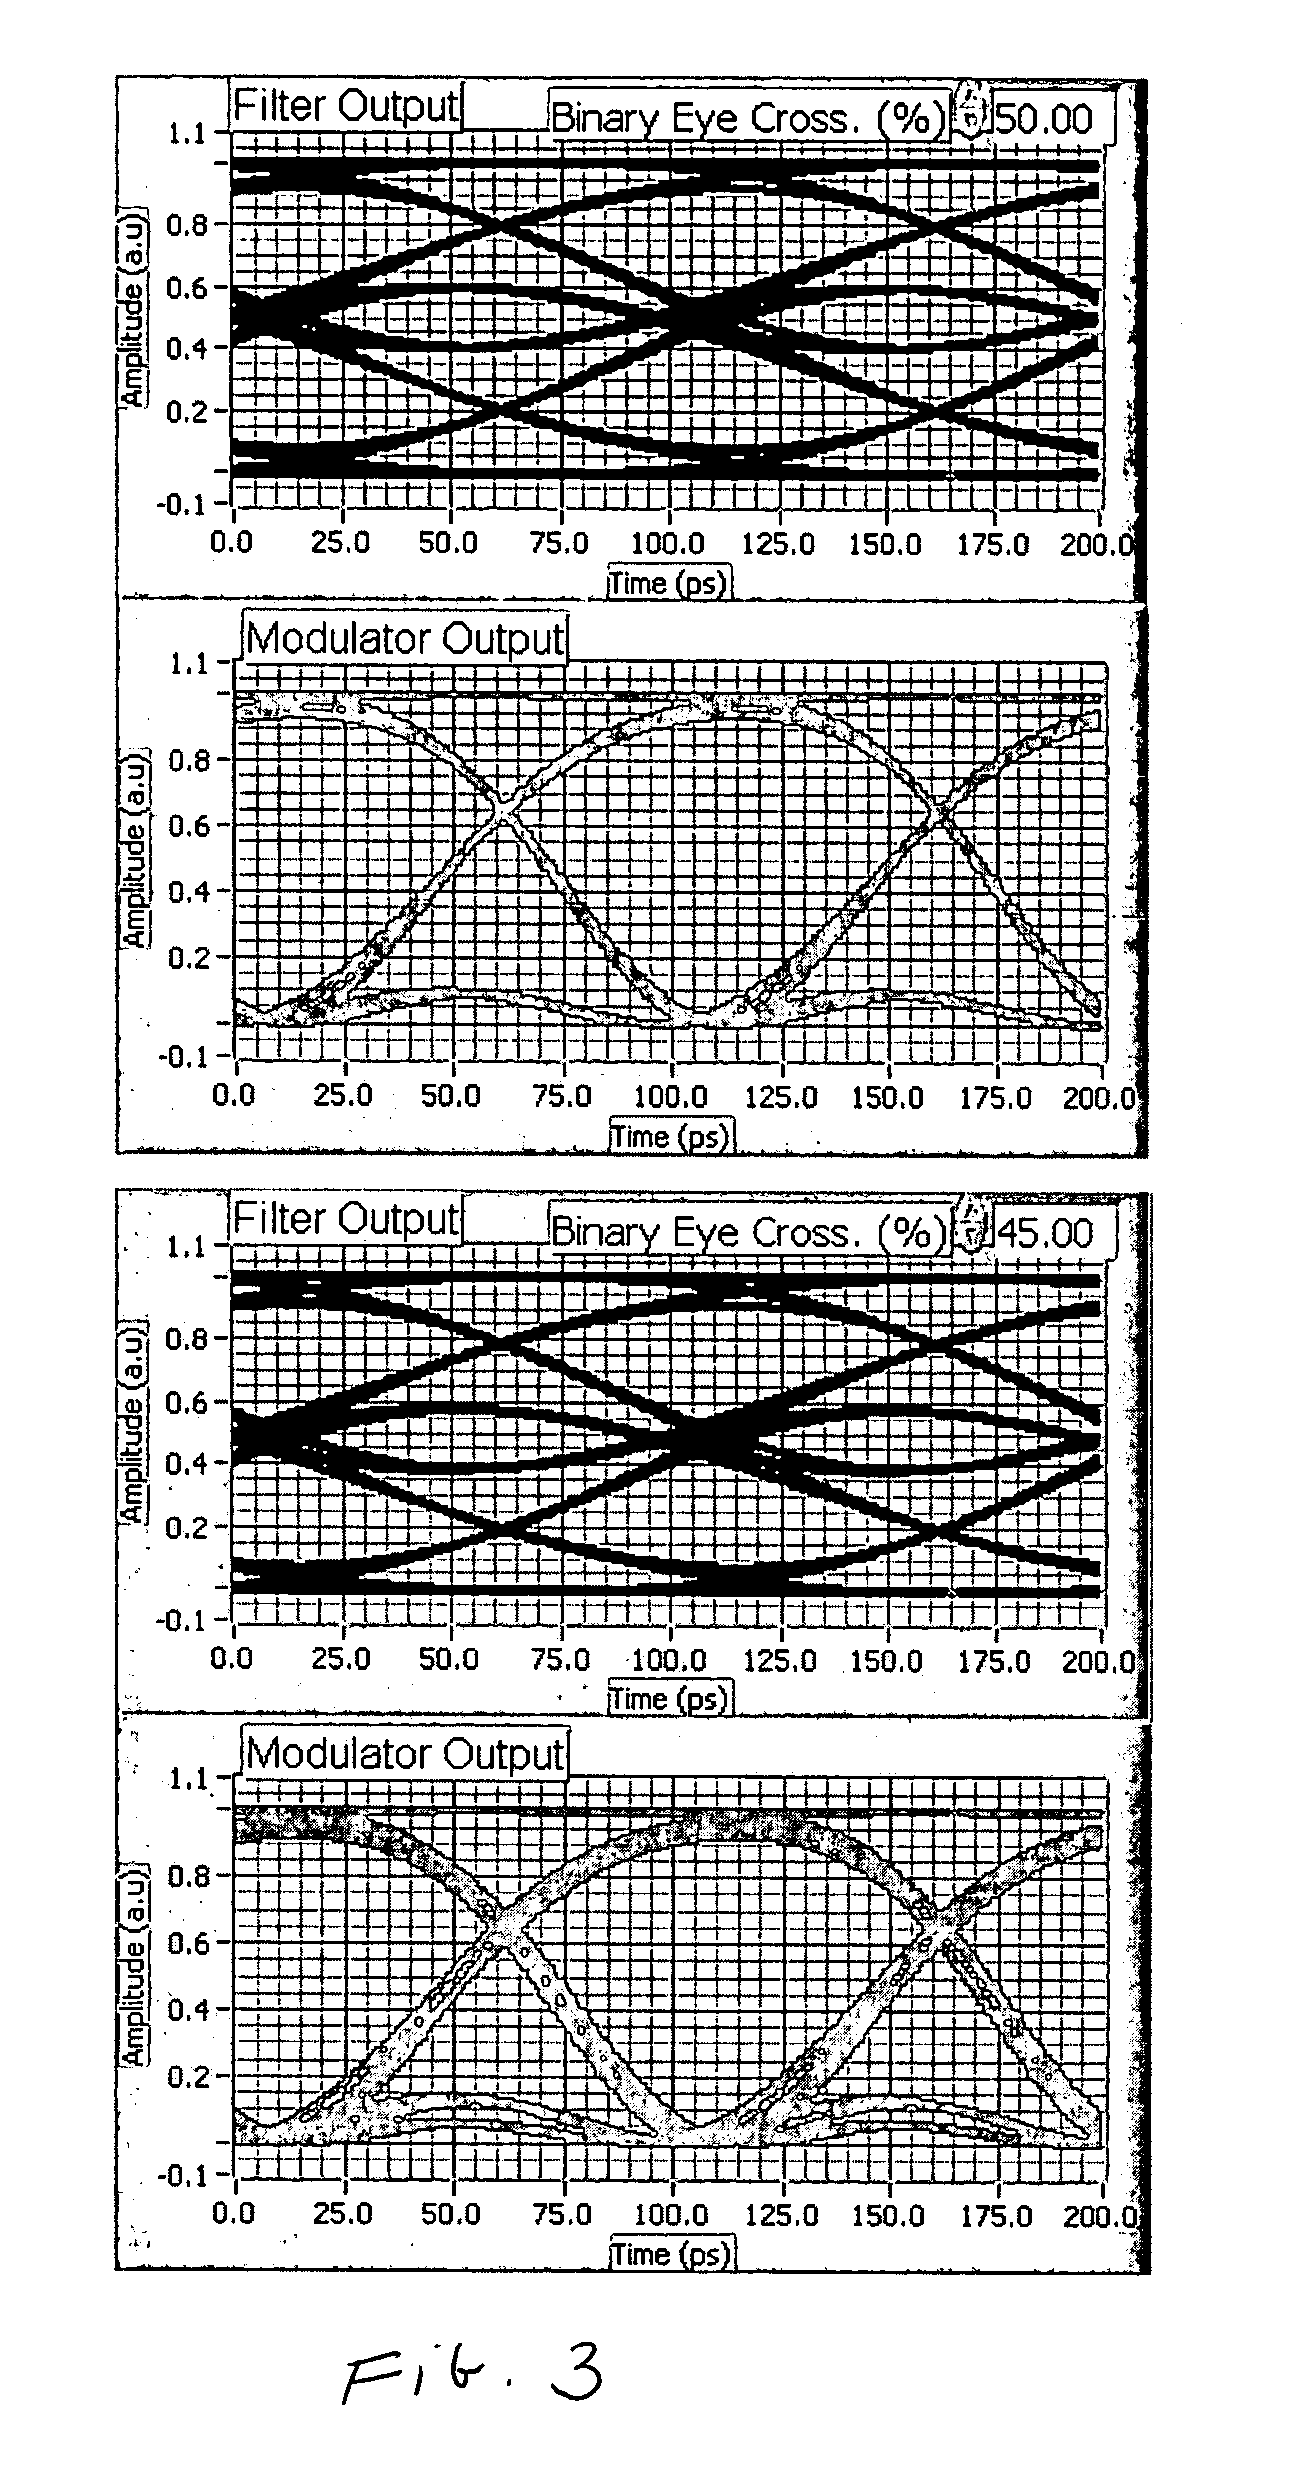 Automatic DC bias control for the duobinary modulation format utilizing a low-pass electrical filter